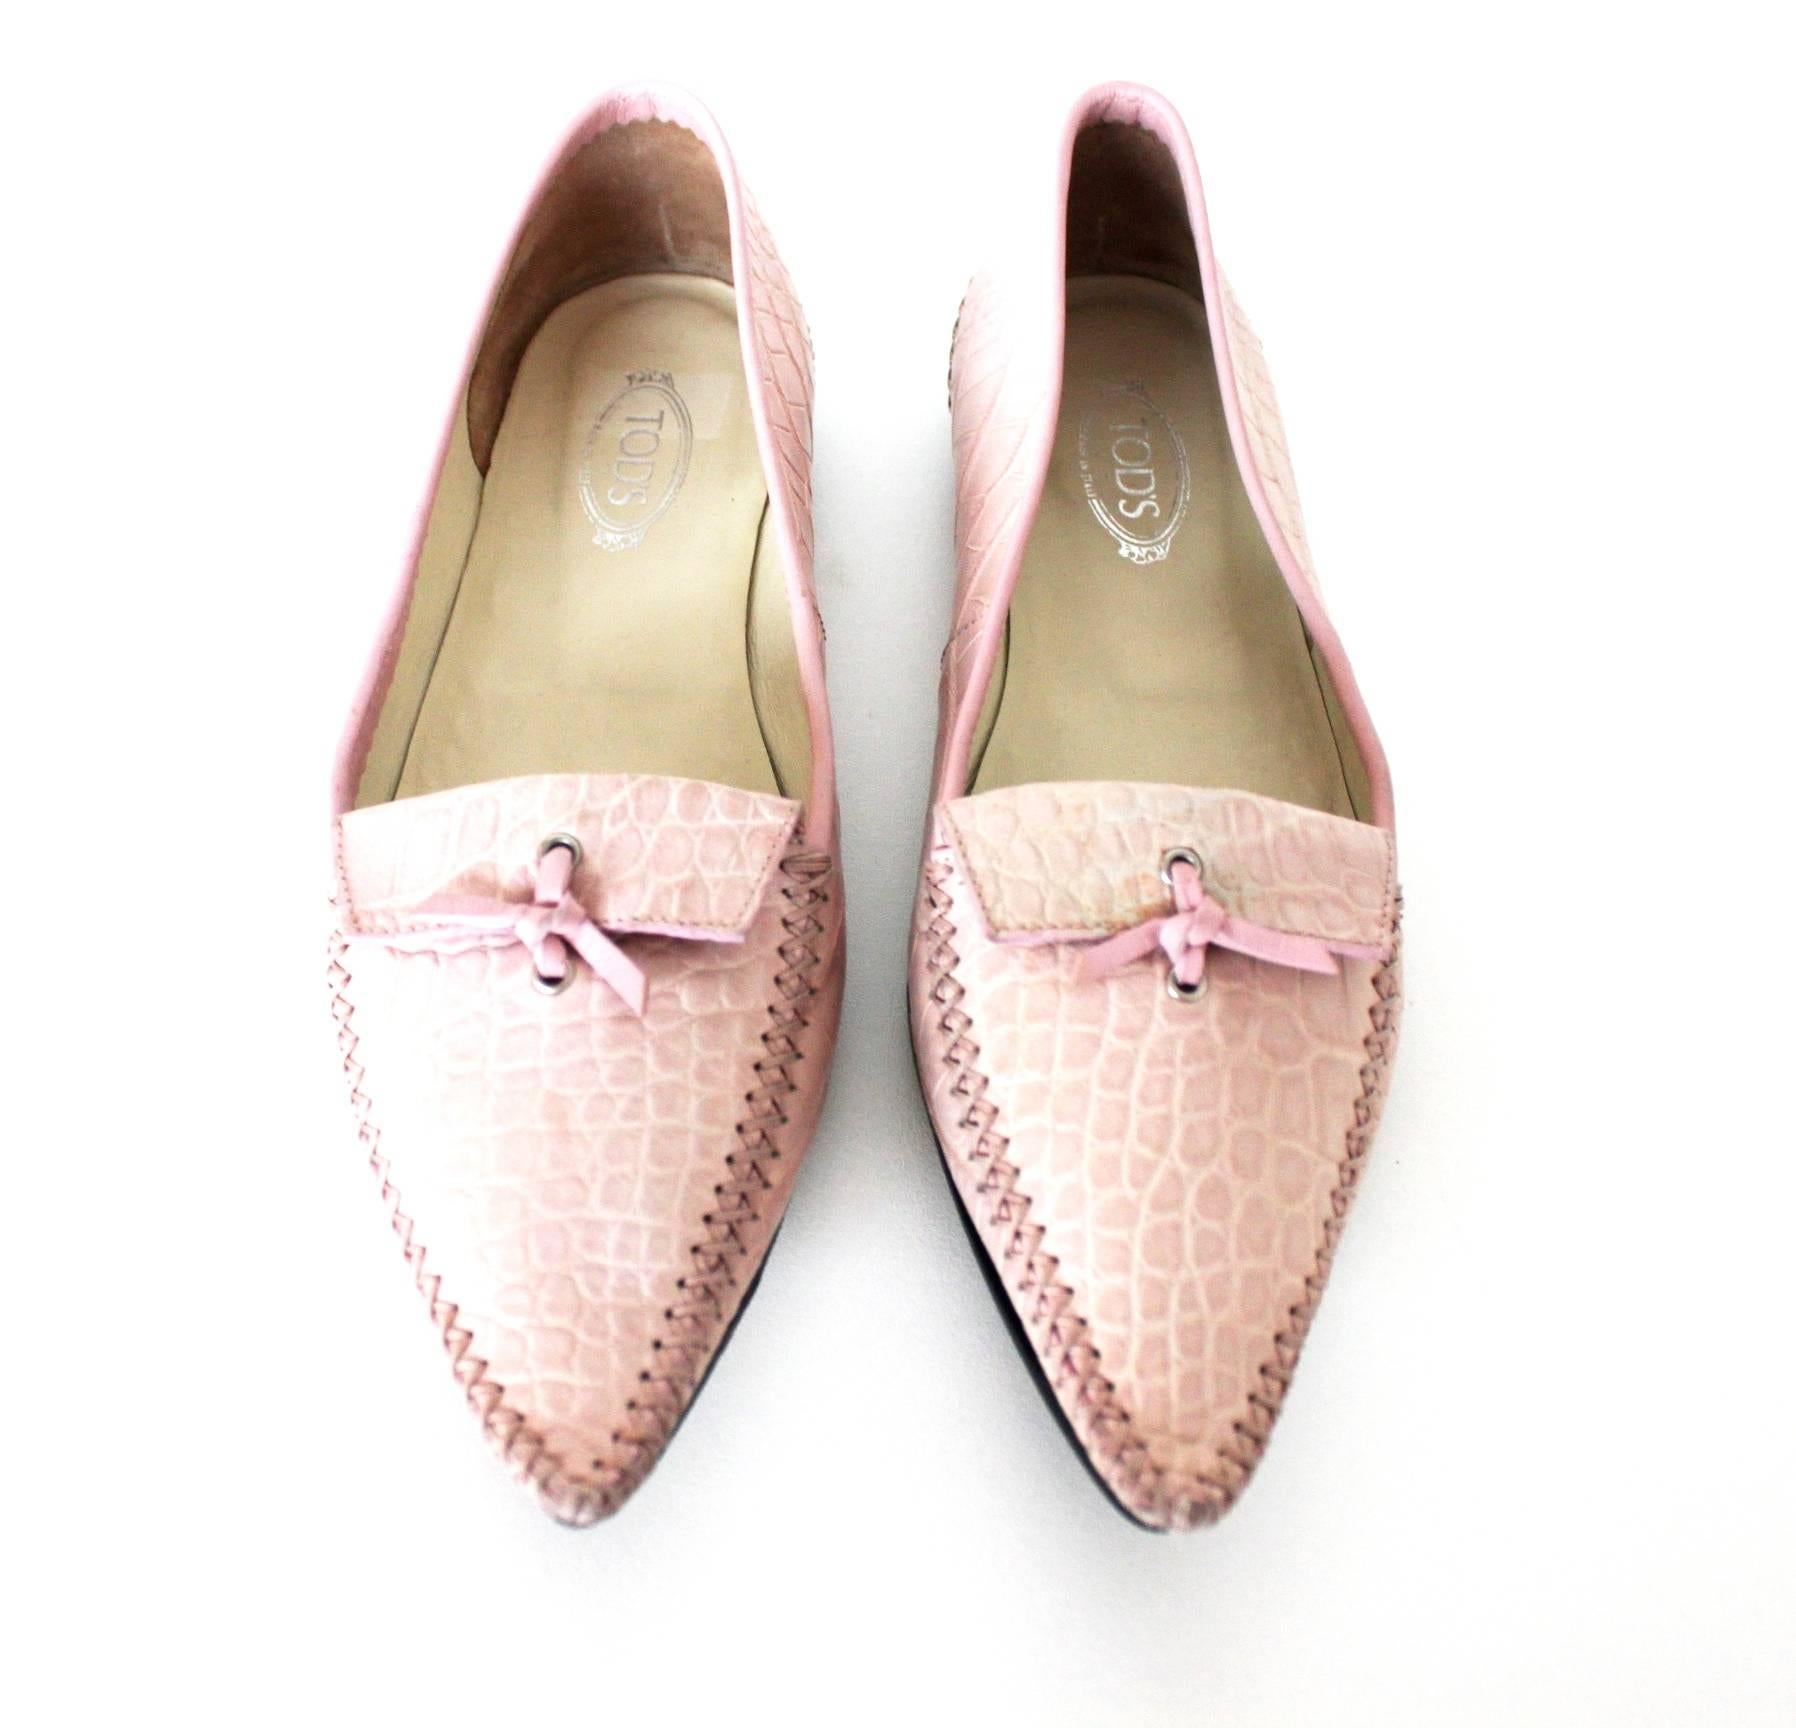 AMAZING TOD'S ALLIGATOR CROCODILE SKIN MOCCASINS

RARE FIND 

RETAIL PRICE WAS EUR 2'800 / USD 3'300 PLUS TAXES

DETAILS: 

A TOD'S signature piece that will last you for years
Pure luxury
Beautiful soft pink exotic skin crocodile leather